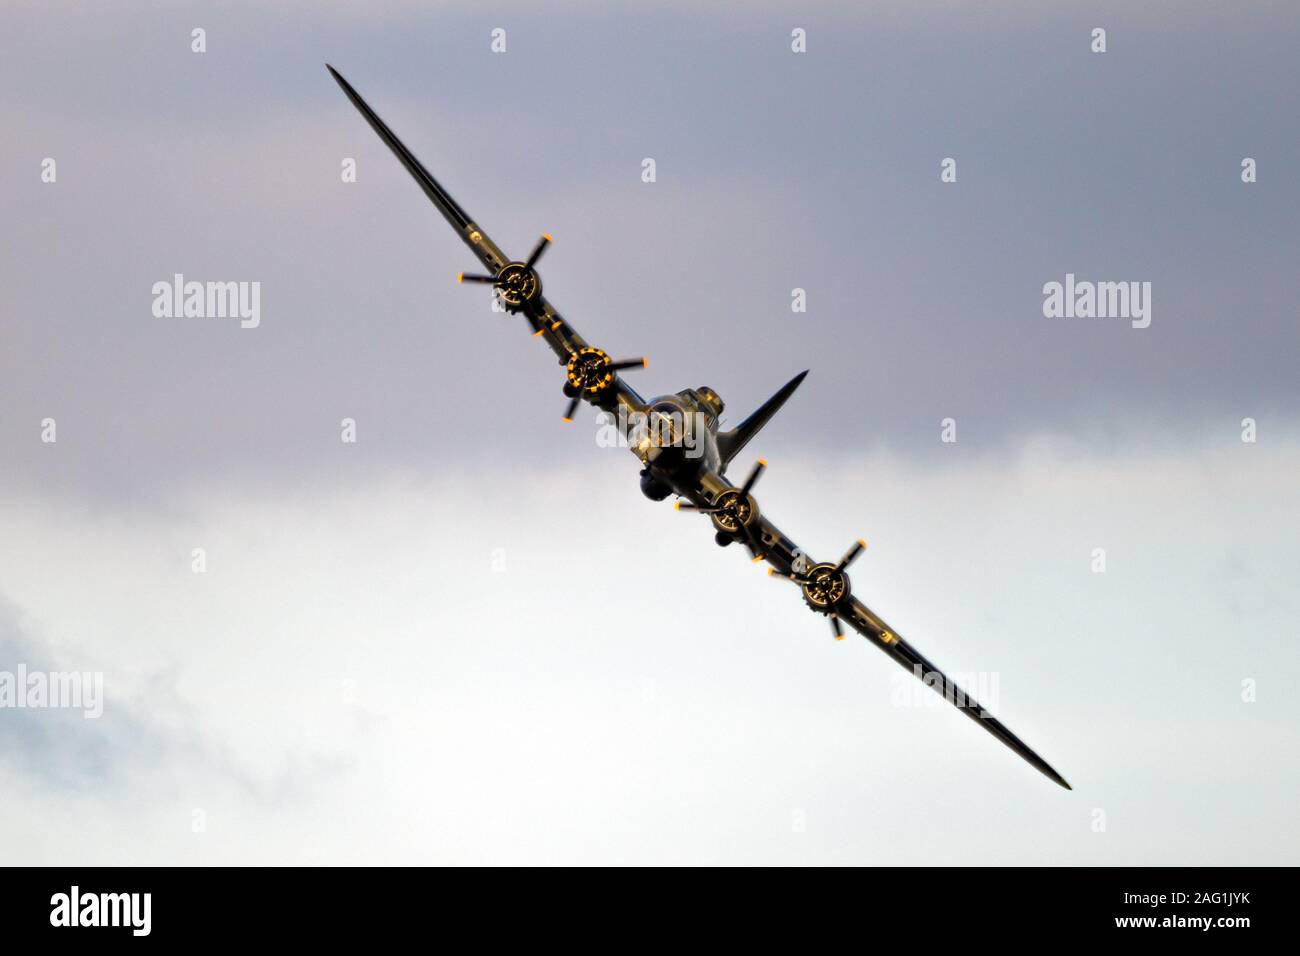 SANICOLE, BELGIUM - SEP 13, 2019: Vintage warbird US Air Force Boeing B-17 Flying Fortress WW2 bomber plane perforing at the Sanice Sunset Airshow. Stock Photo